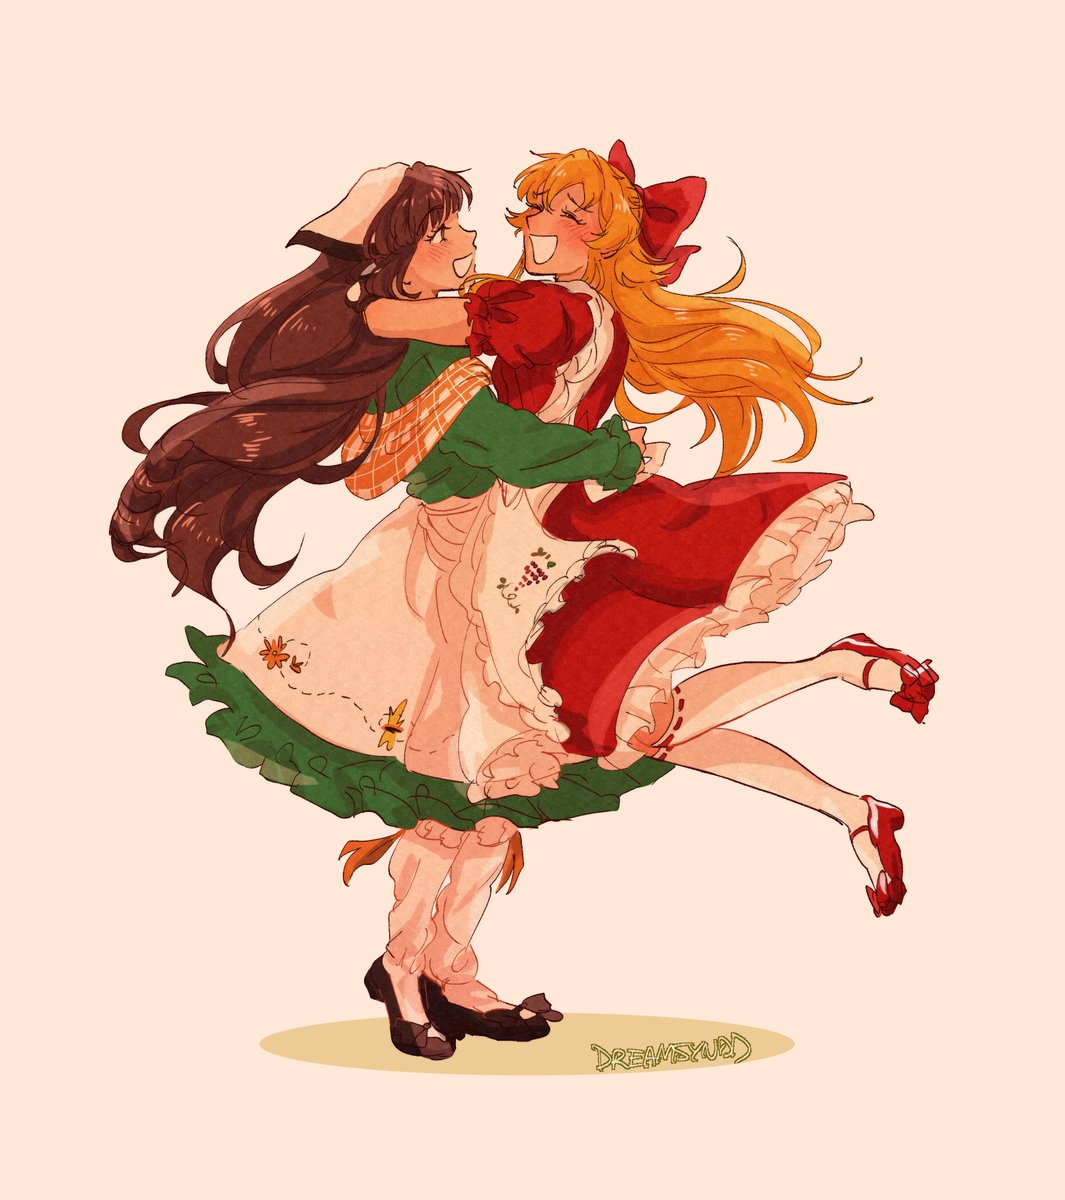 「"I must dance with you, after all - or y」|DreamSyndd ✨のイラスト